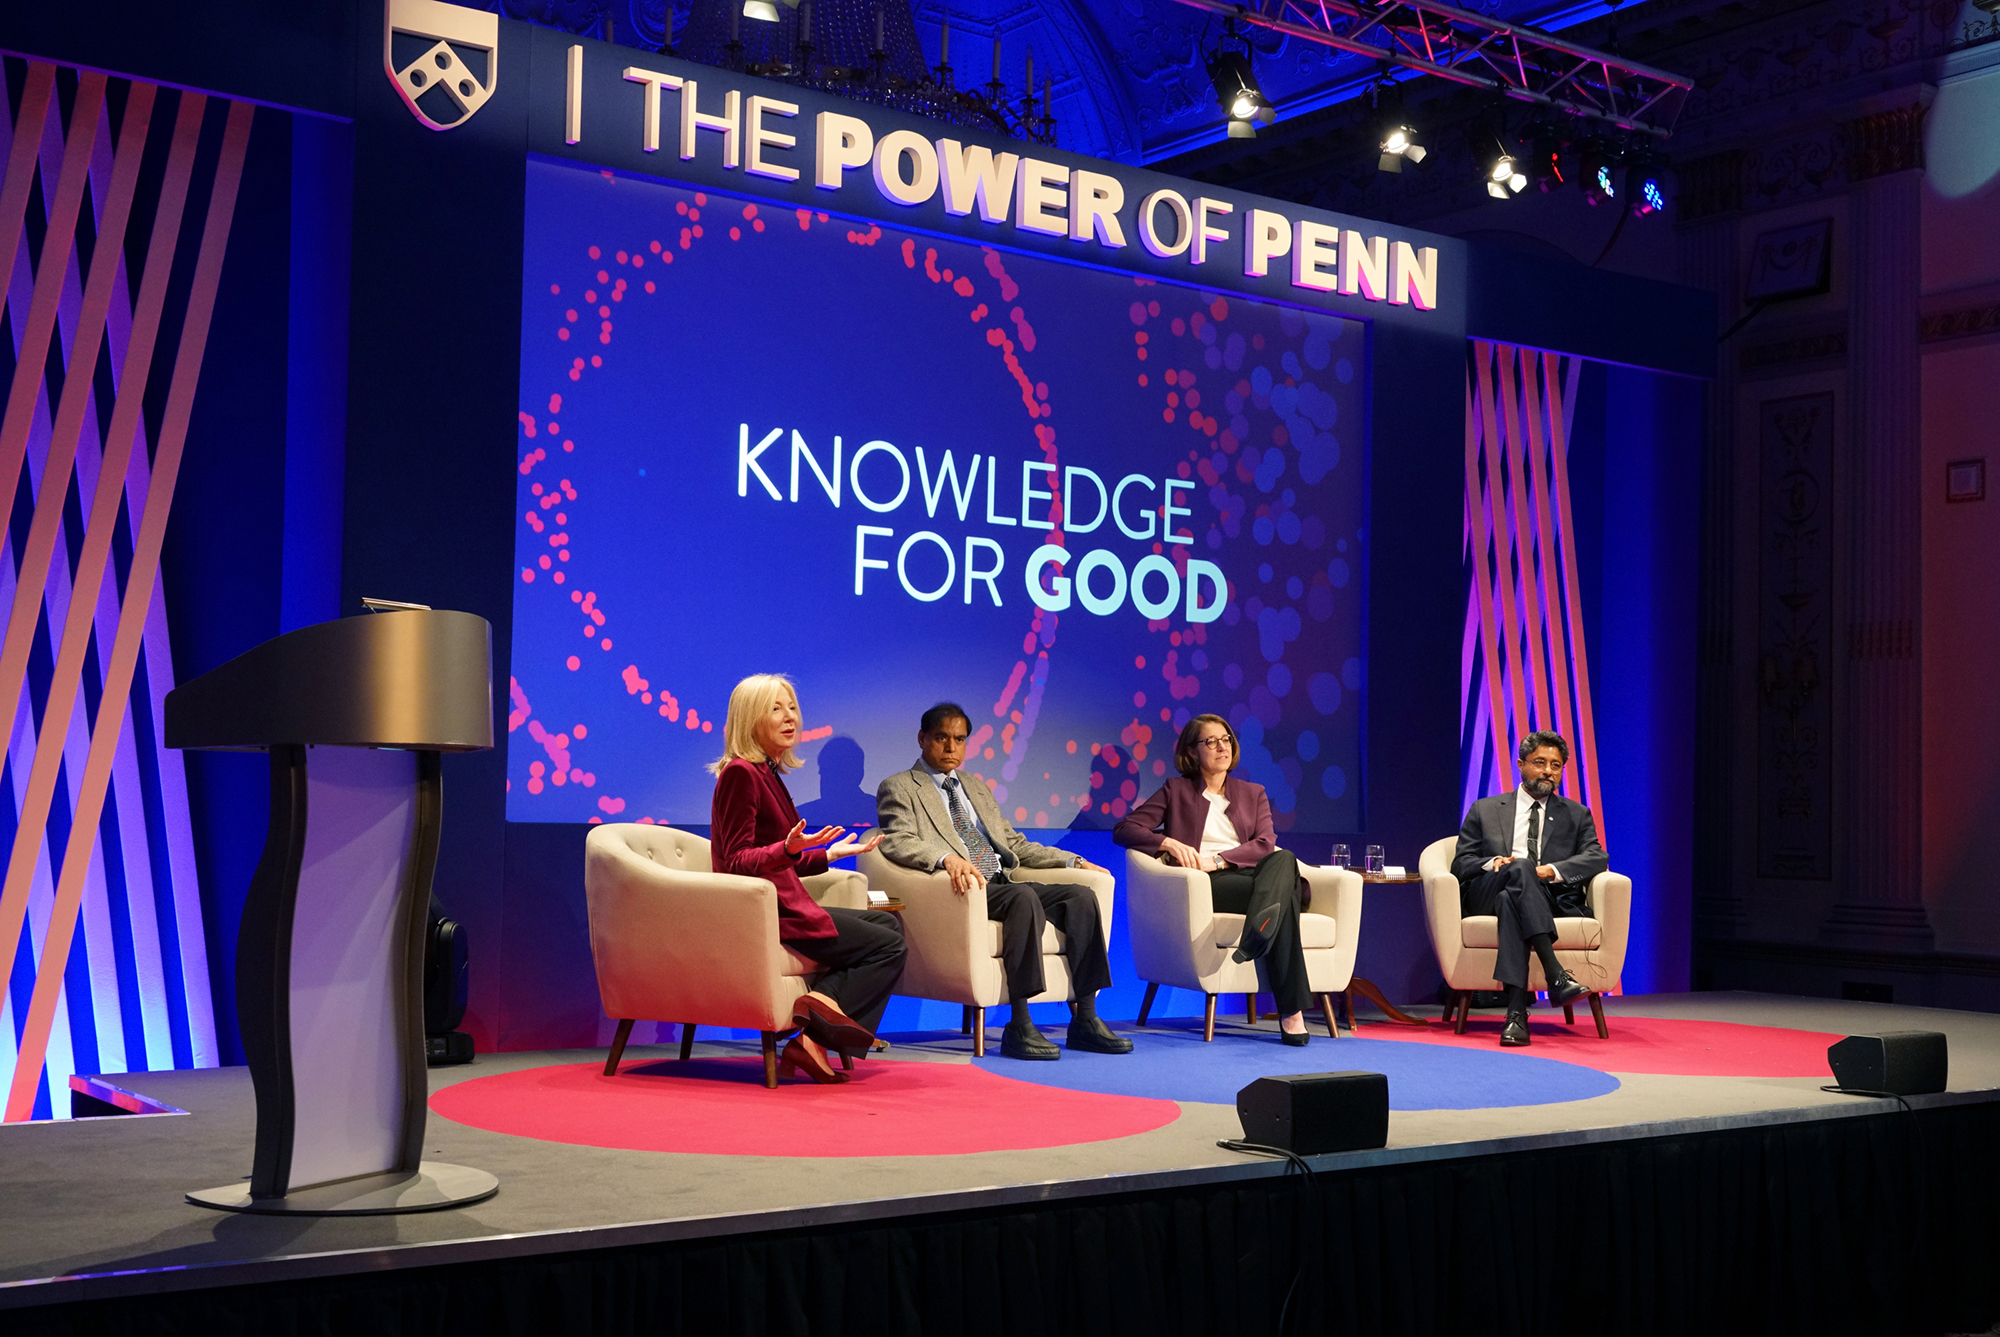 group-sitting-on-stage-power-of-penn-backdrop